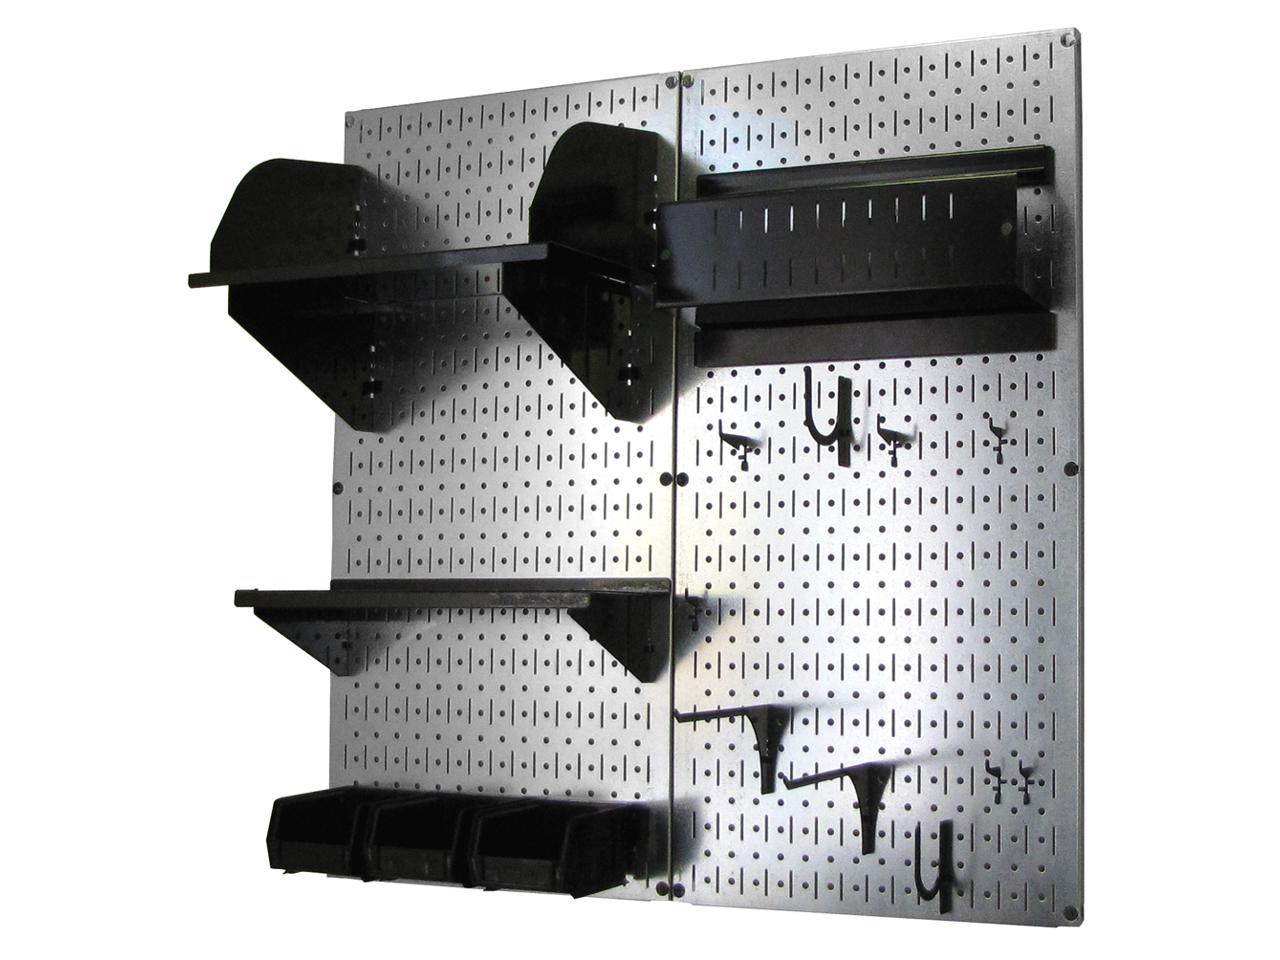 Wall Control Pegboard Hobby Craft Pegboard Organizer Storage Kit with  Metallic Pegboard and Black Accessories